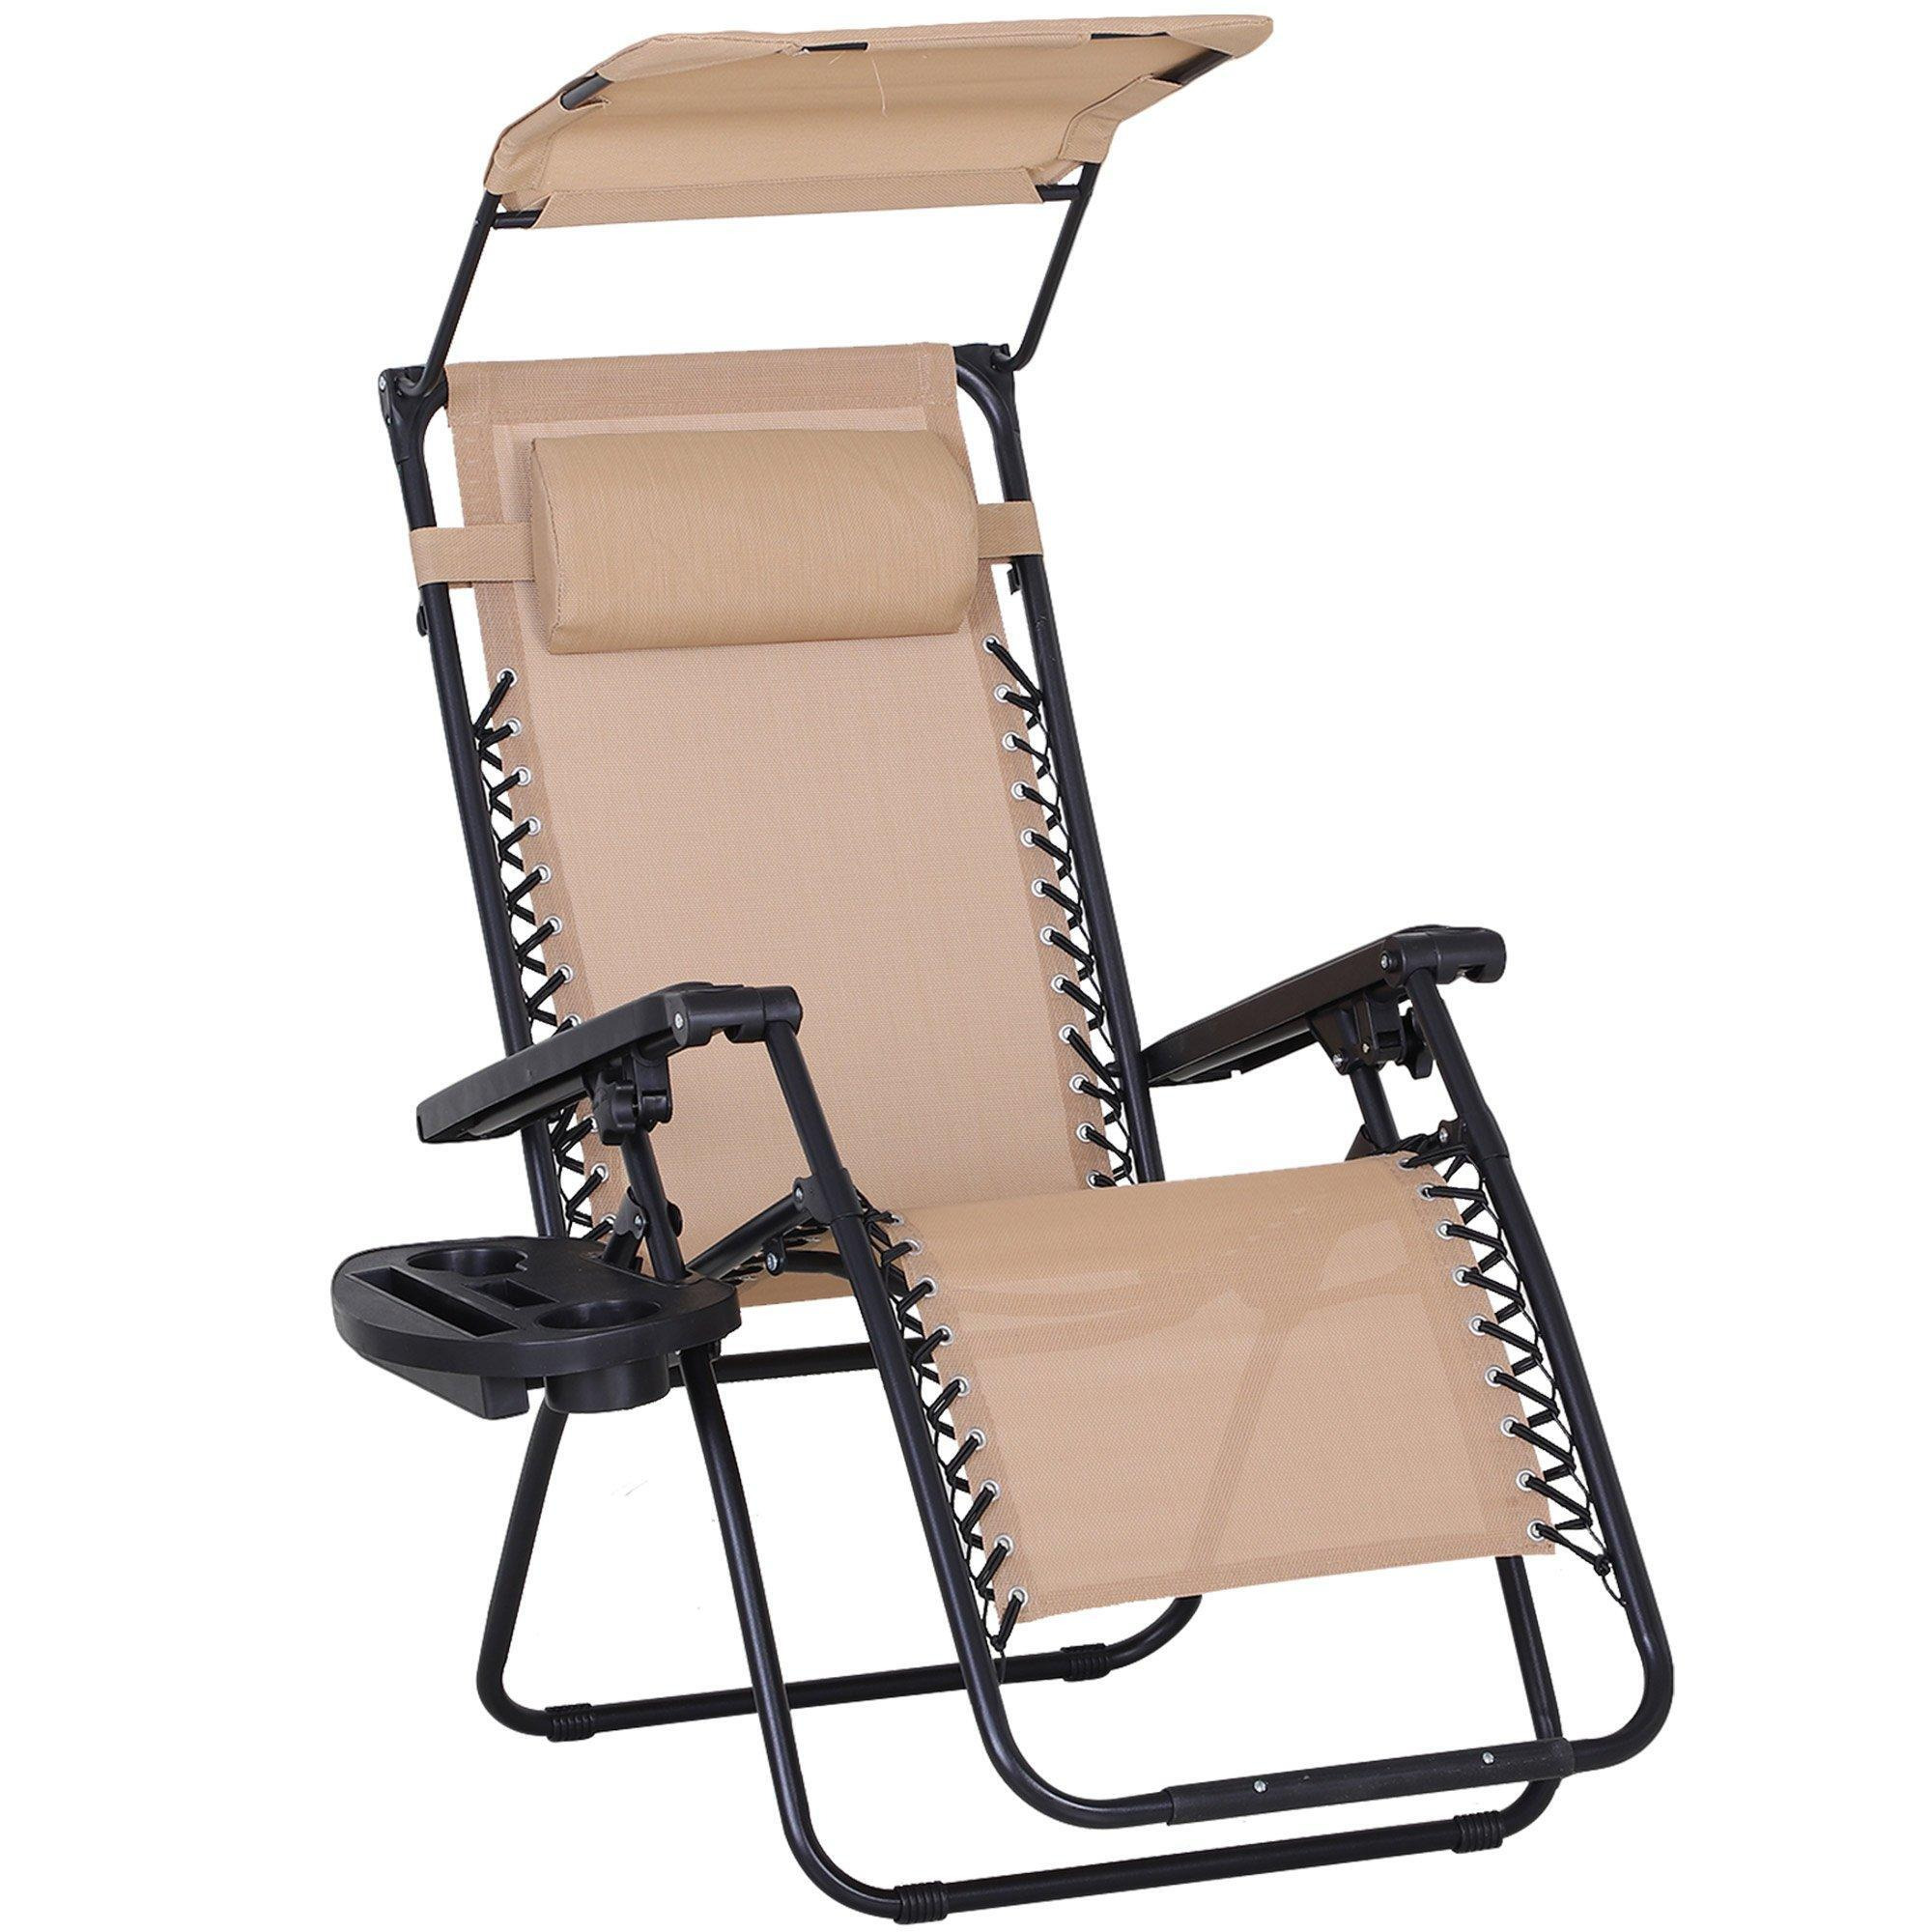 Zero Gravity Chair Adjustable Patio Lounge with Cup Holder - image 1